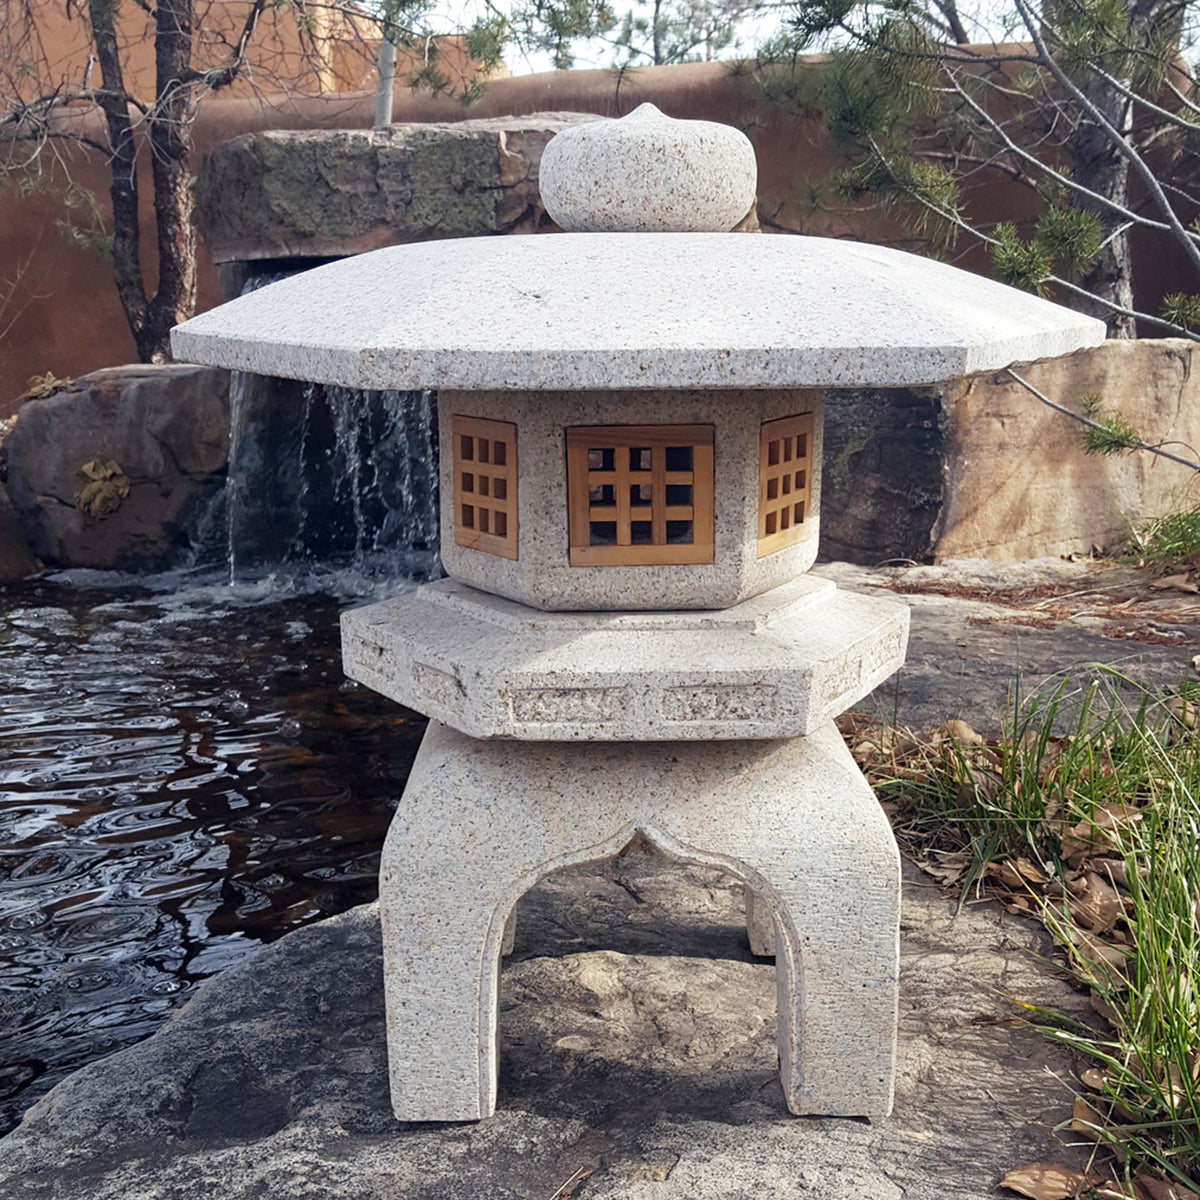 Stone Forest Antique Yukimi: hand-carved, traditional Japanese lantern made of beige granite.  image 1 of 4